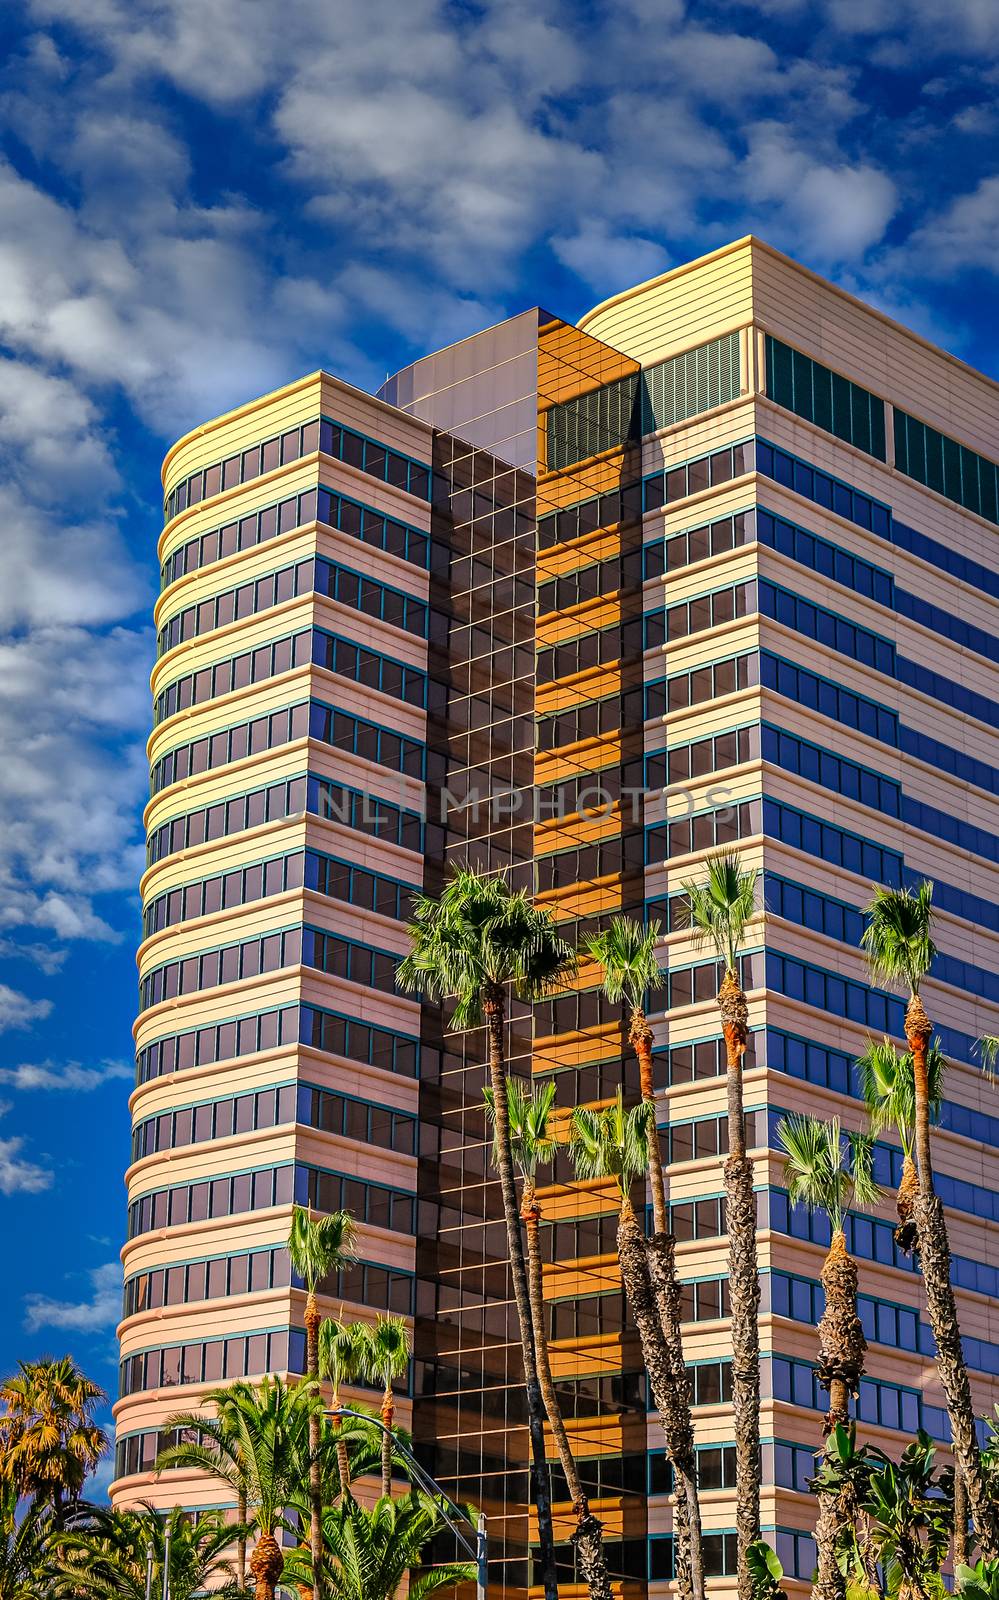 Colorful Tropical Condo Tower against nice sky in Long Beach